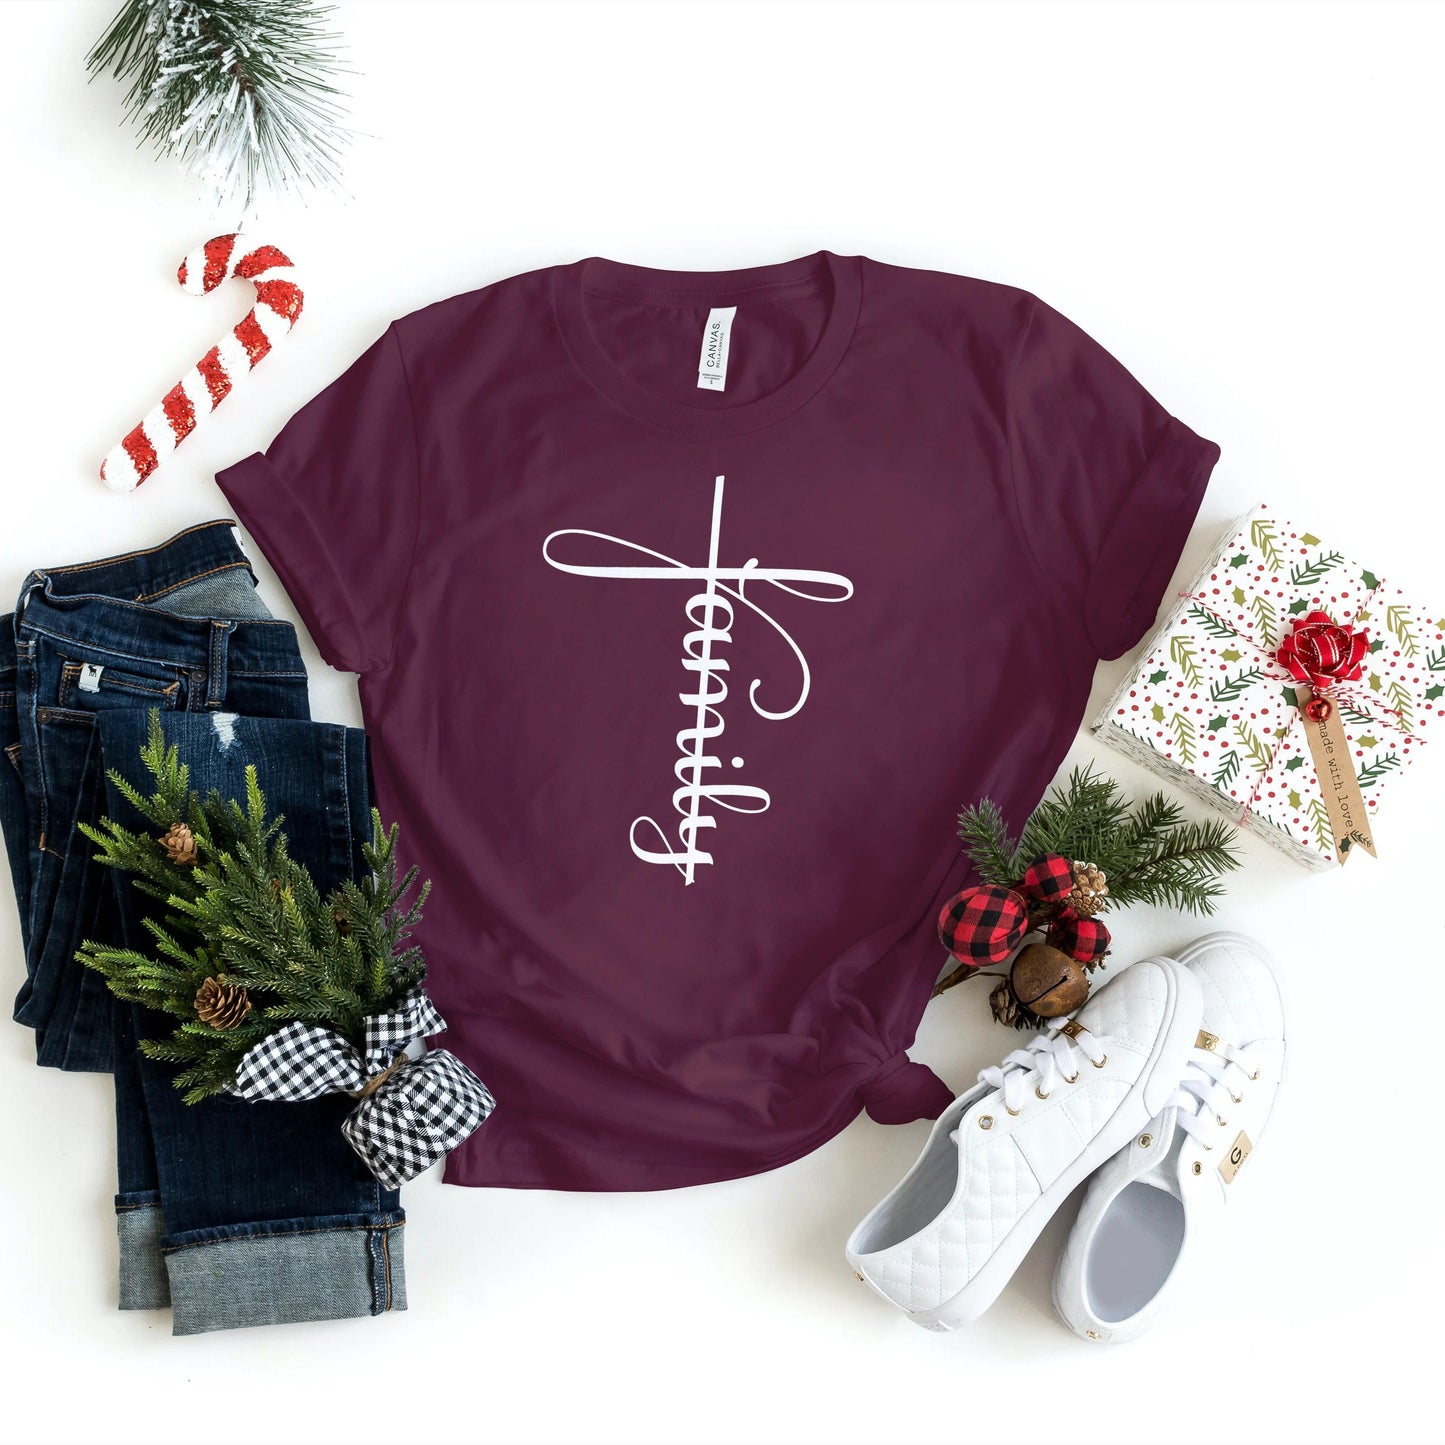 Family Shirt - Family Cross - Holiday Family Shirts - Group Shirts - Gifts - Healthy Wealthy Skinny